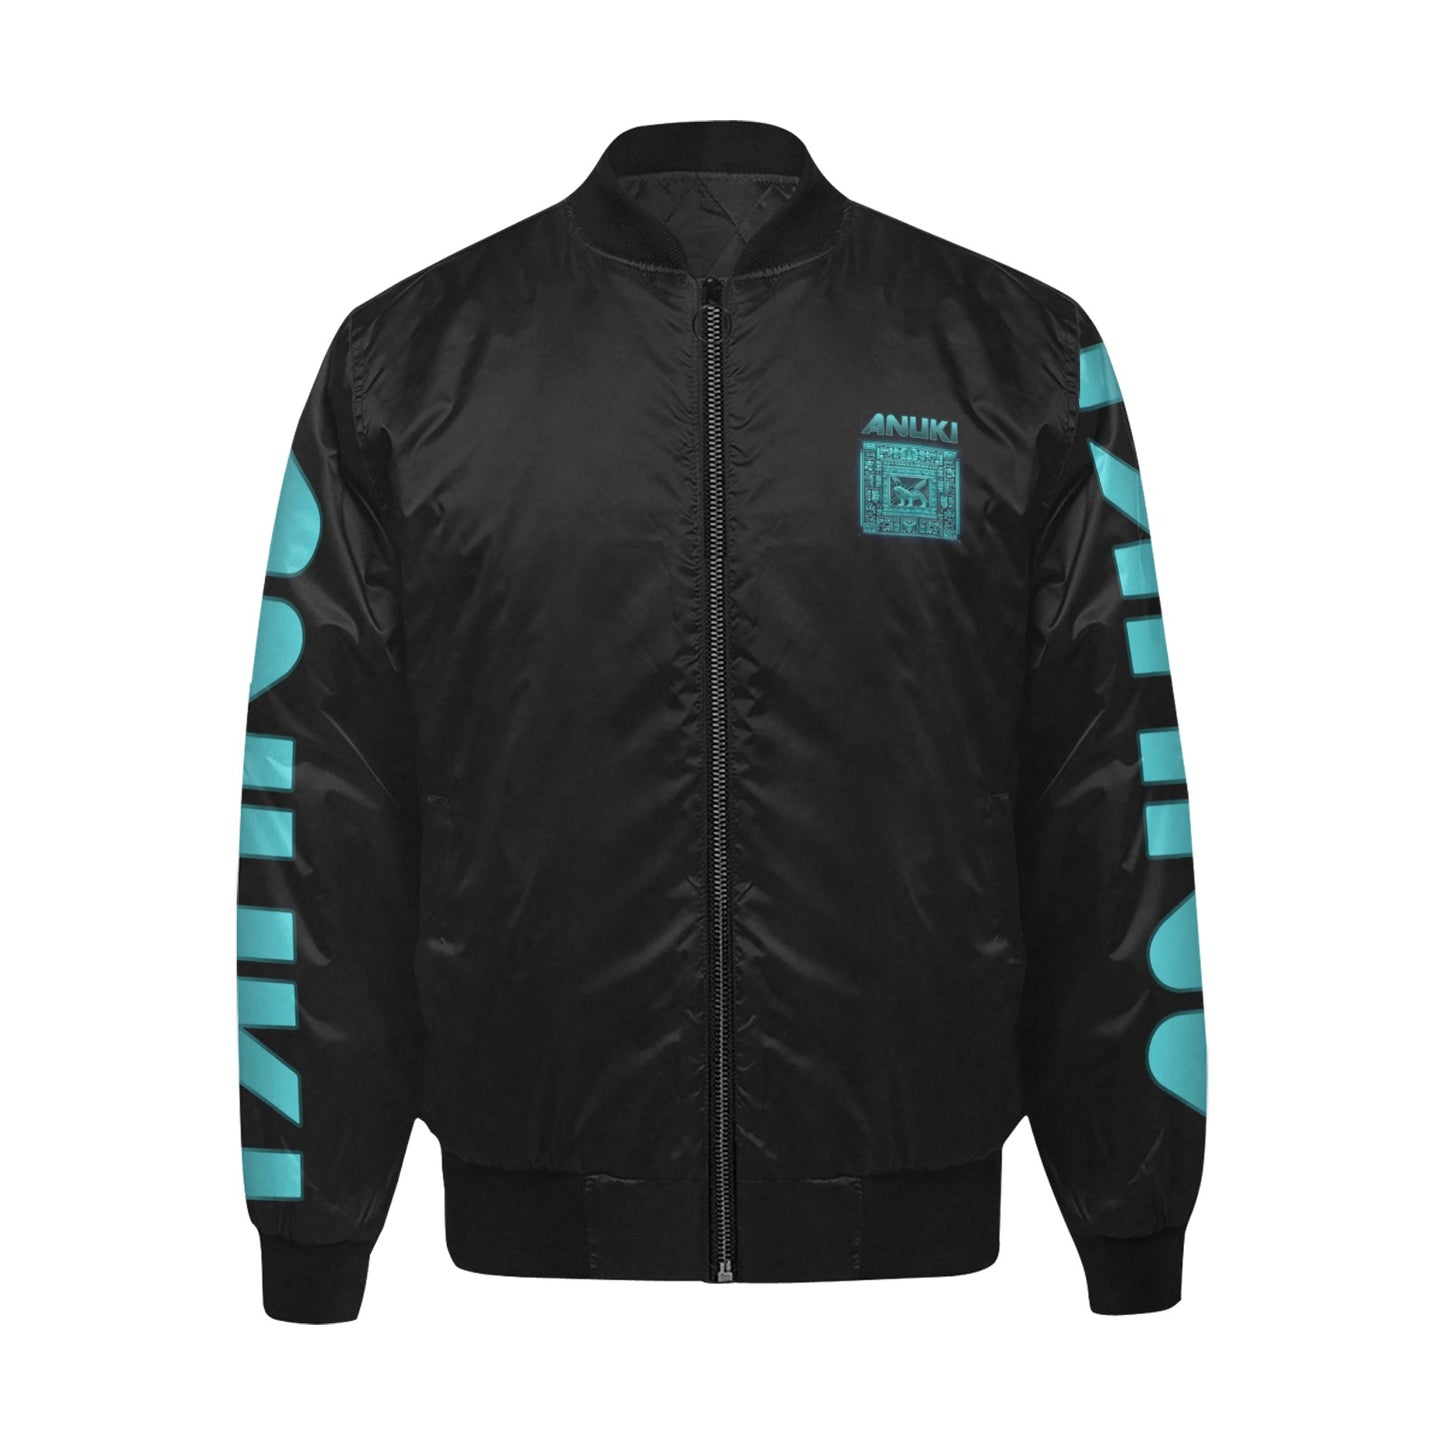 The SabreNeon Bomber